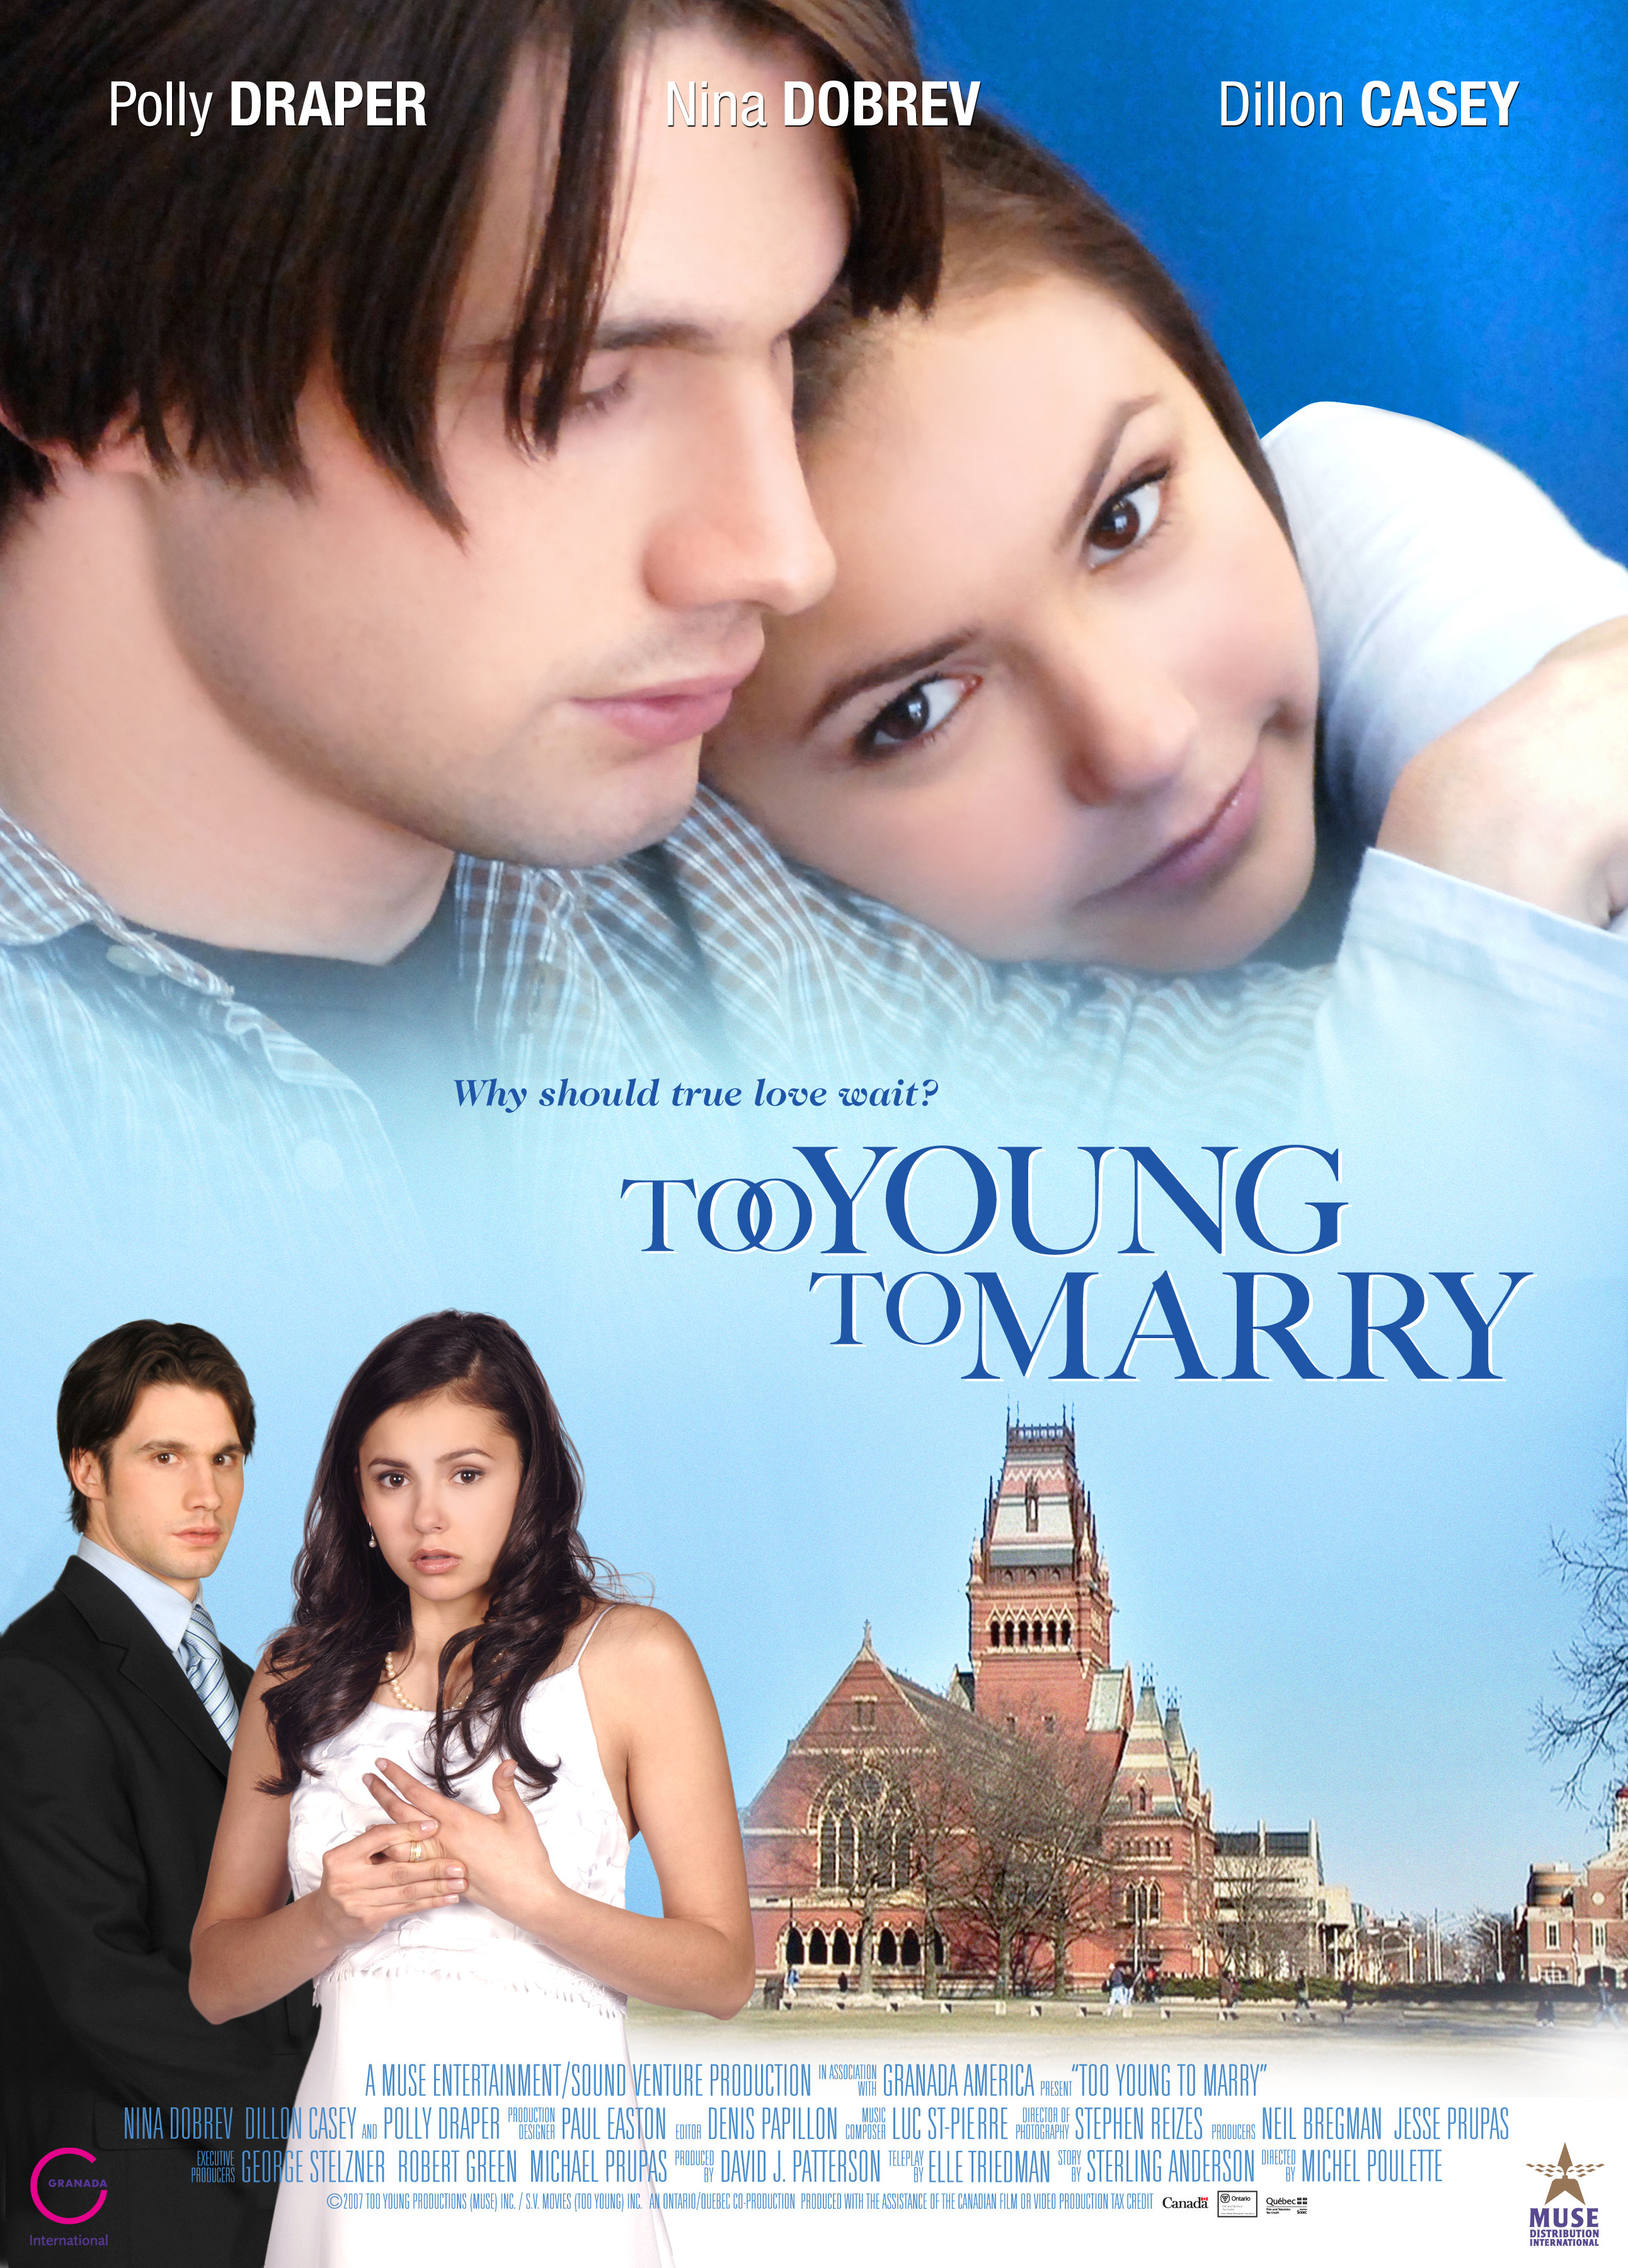 Too Young to Marry (2007) Screenshot 1